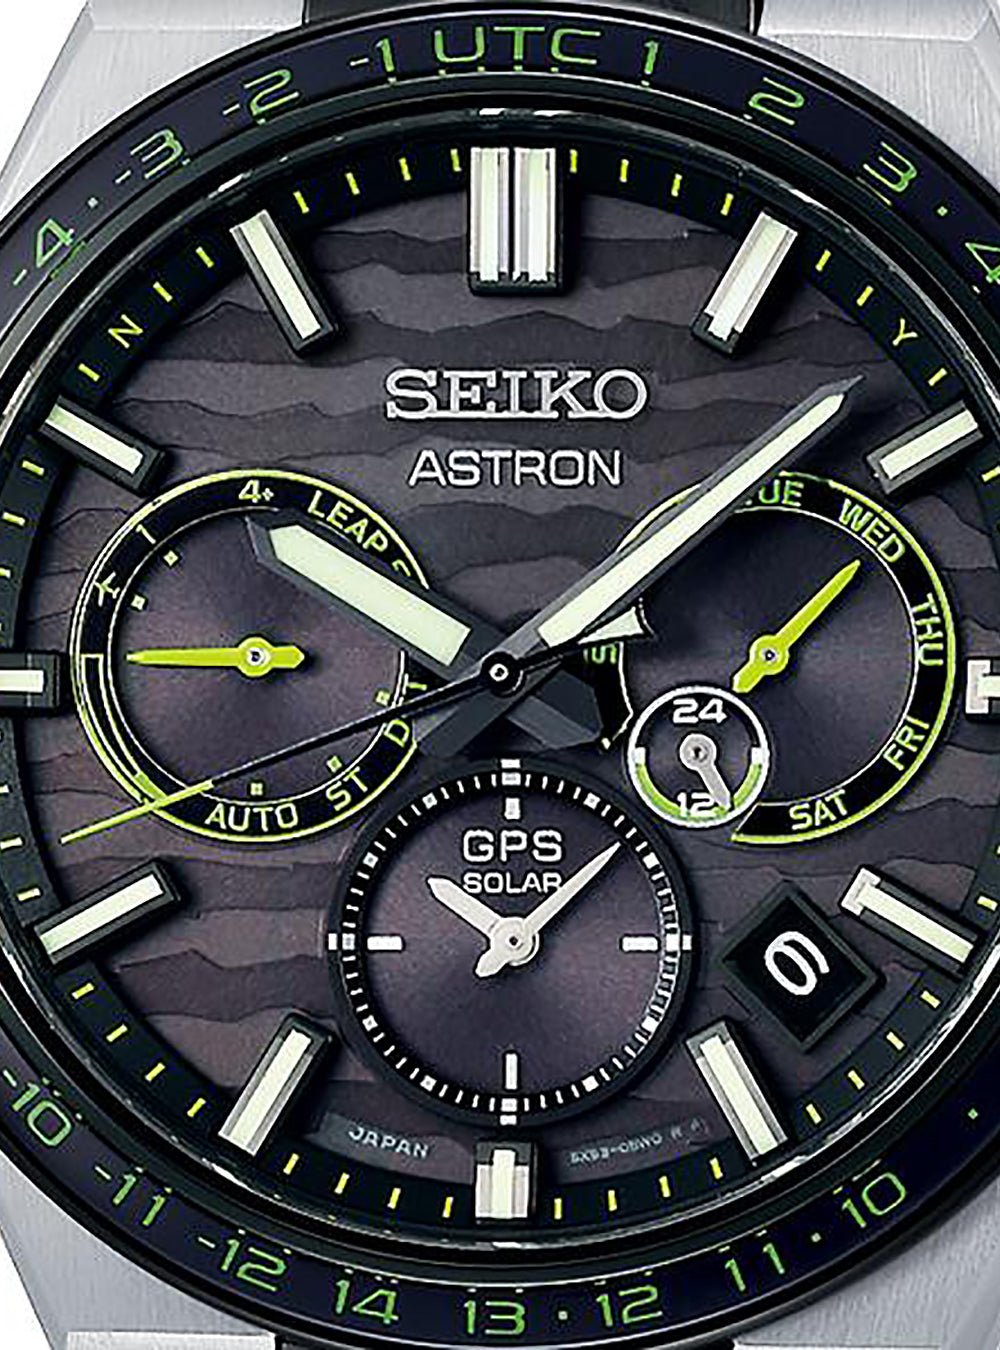 SEIKO WATCH ASTRON NEXTER GPS SOLAR 2023 LIMITED EDITION SSH139 / SBXC139  MADE IN JAPAN JDM